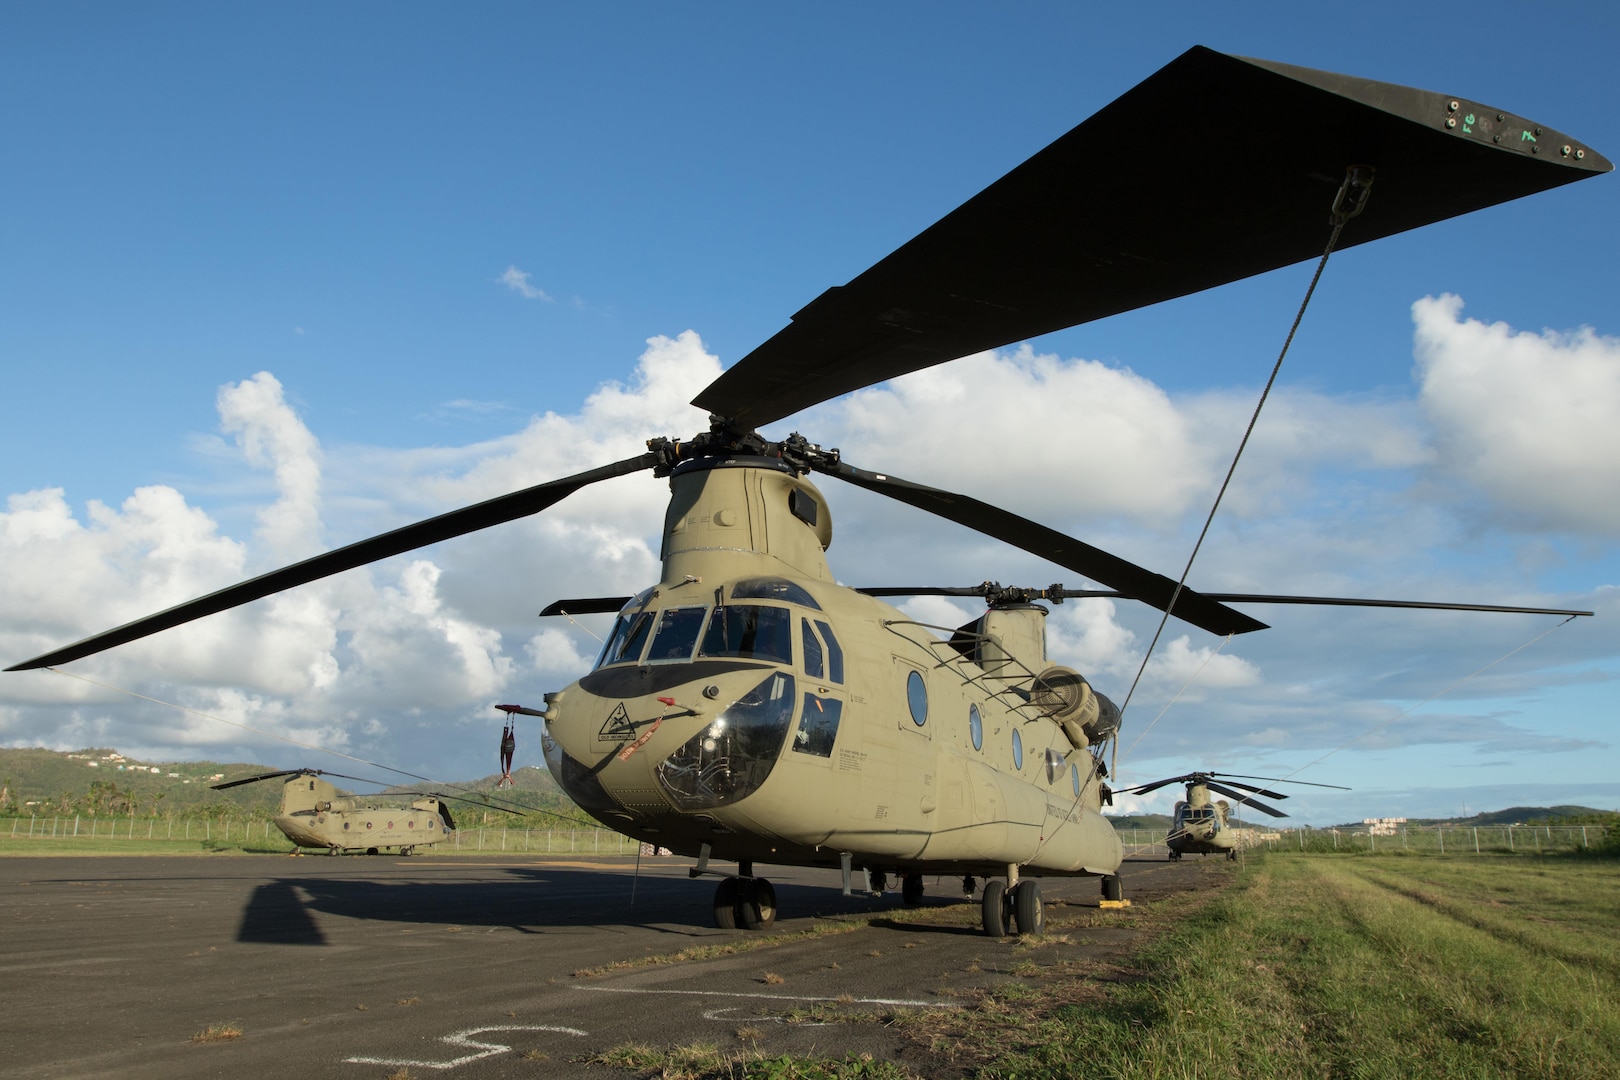 A CH-47 Chinook helicopter sits on the airfield at Roosevelt Roads, Puerto Rico, Nov. 2, 2017. Chinooks are being used to deliver aid to the worst-hit and most remote areas of Puerto Rico as part of the ongoing relief and recovery efforts after the island territory was hit by Hurricanes Irma and Maria. Army photo by Spc. Samuel D. Keenan